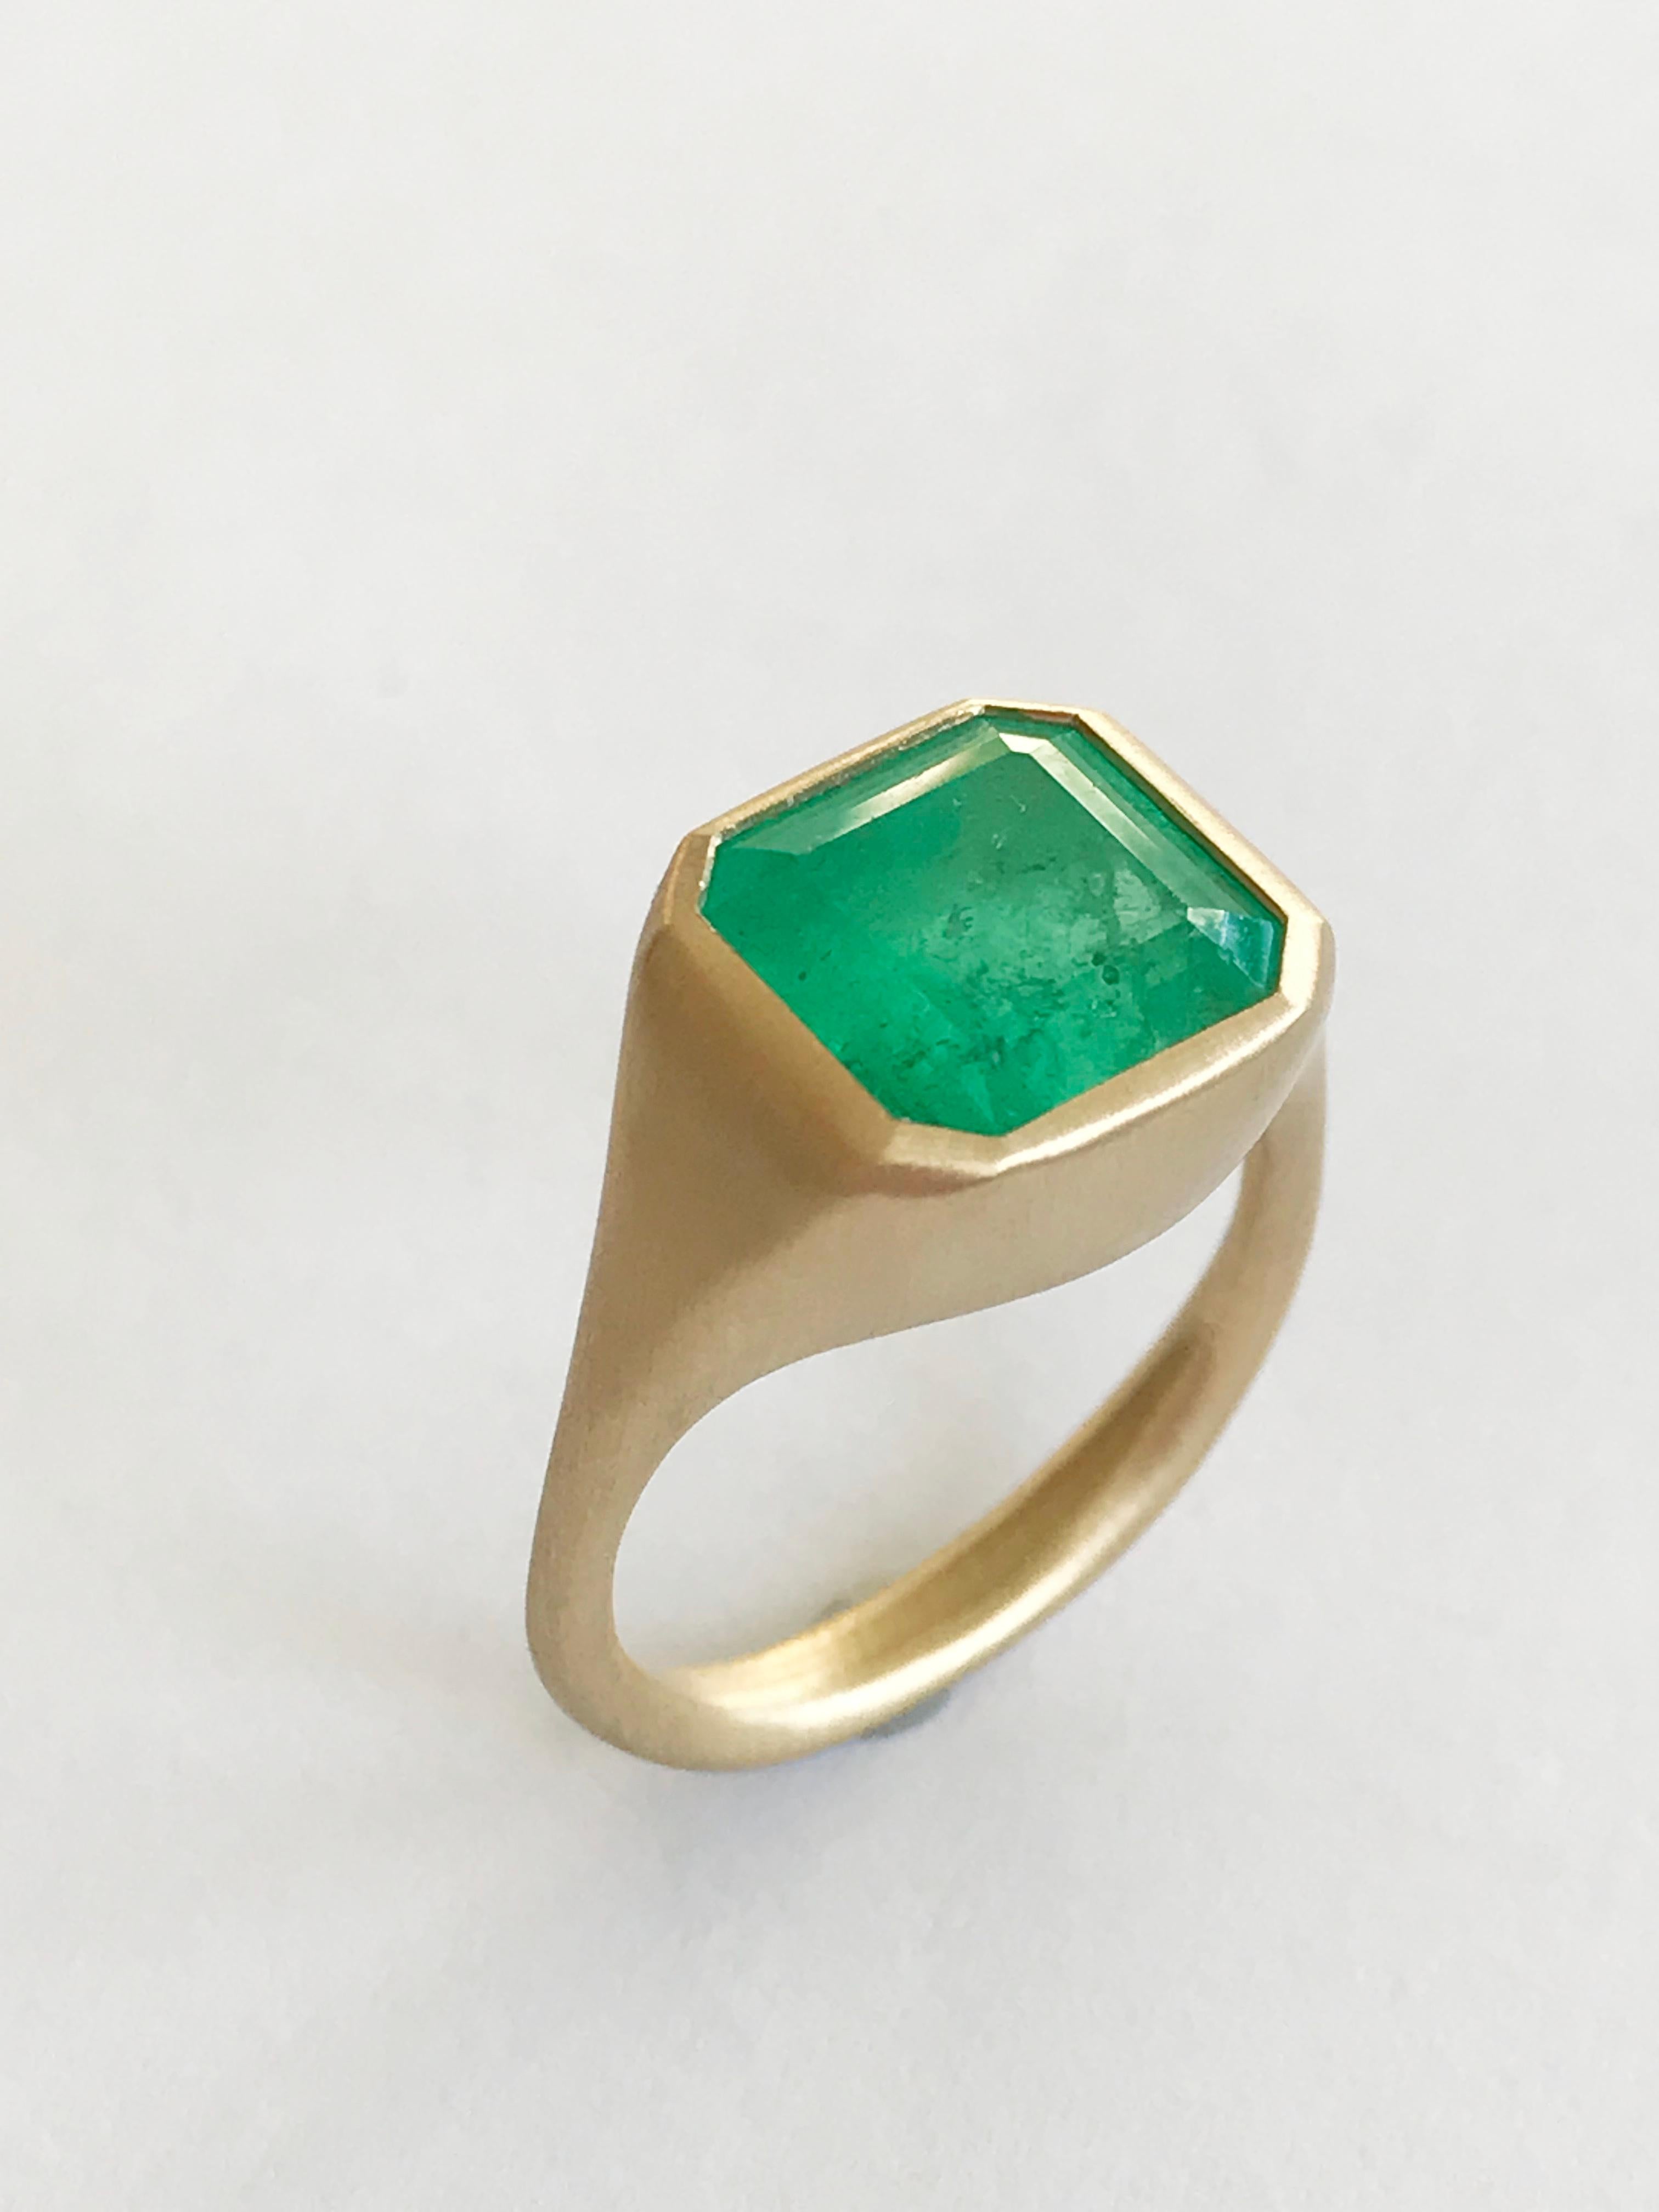 Dalben 4, 12 Carat Colombian Emerald Yellow Gold Ring For Sale 5